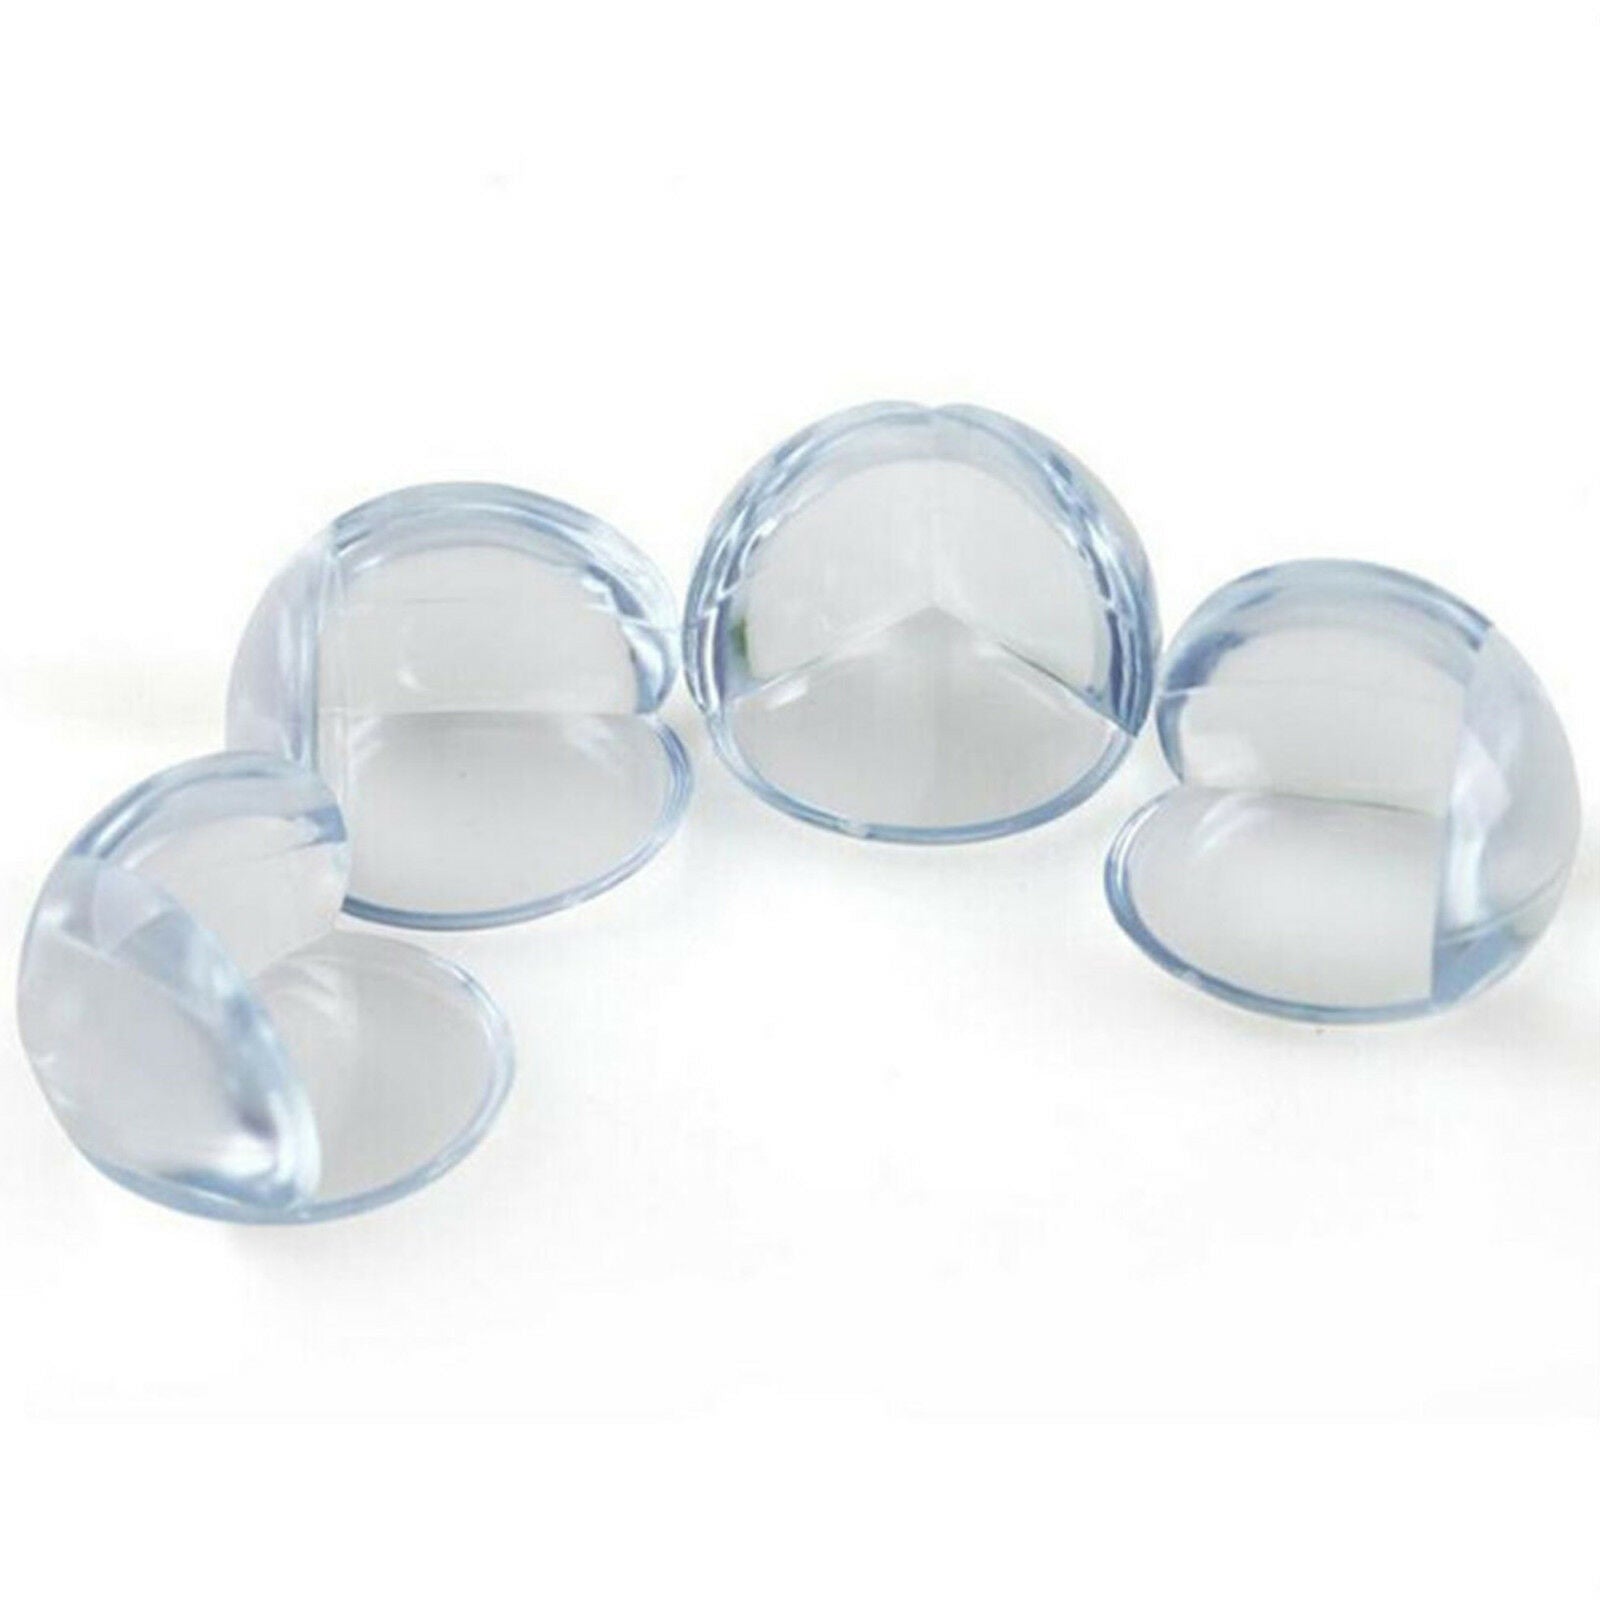 10pcs Child Baby Safe silicone Protector Table Corner Edge Protection Cover